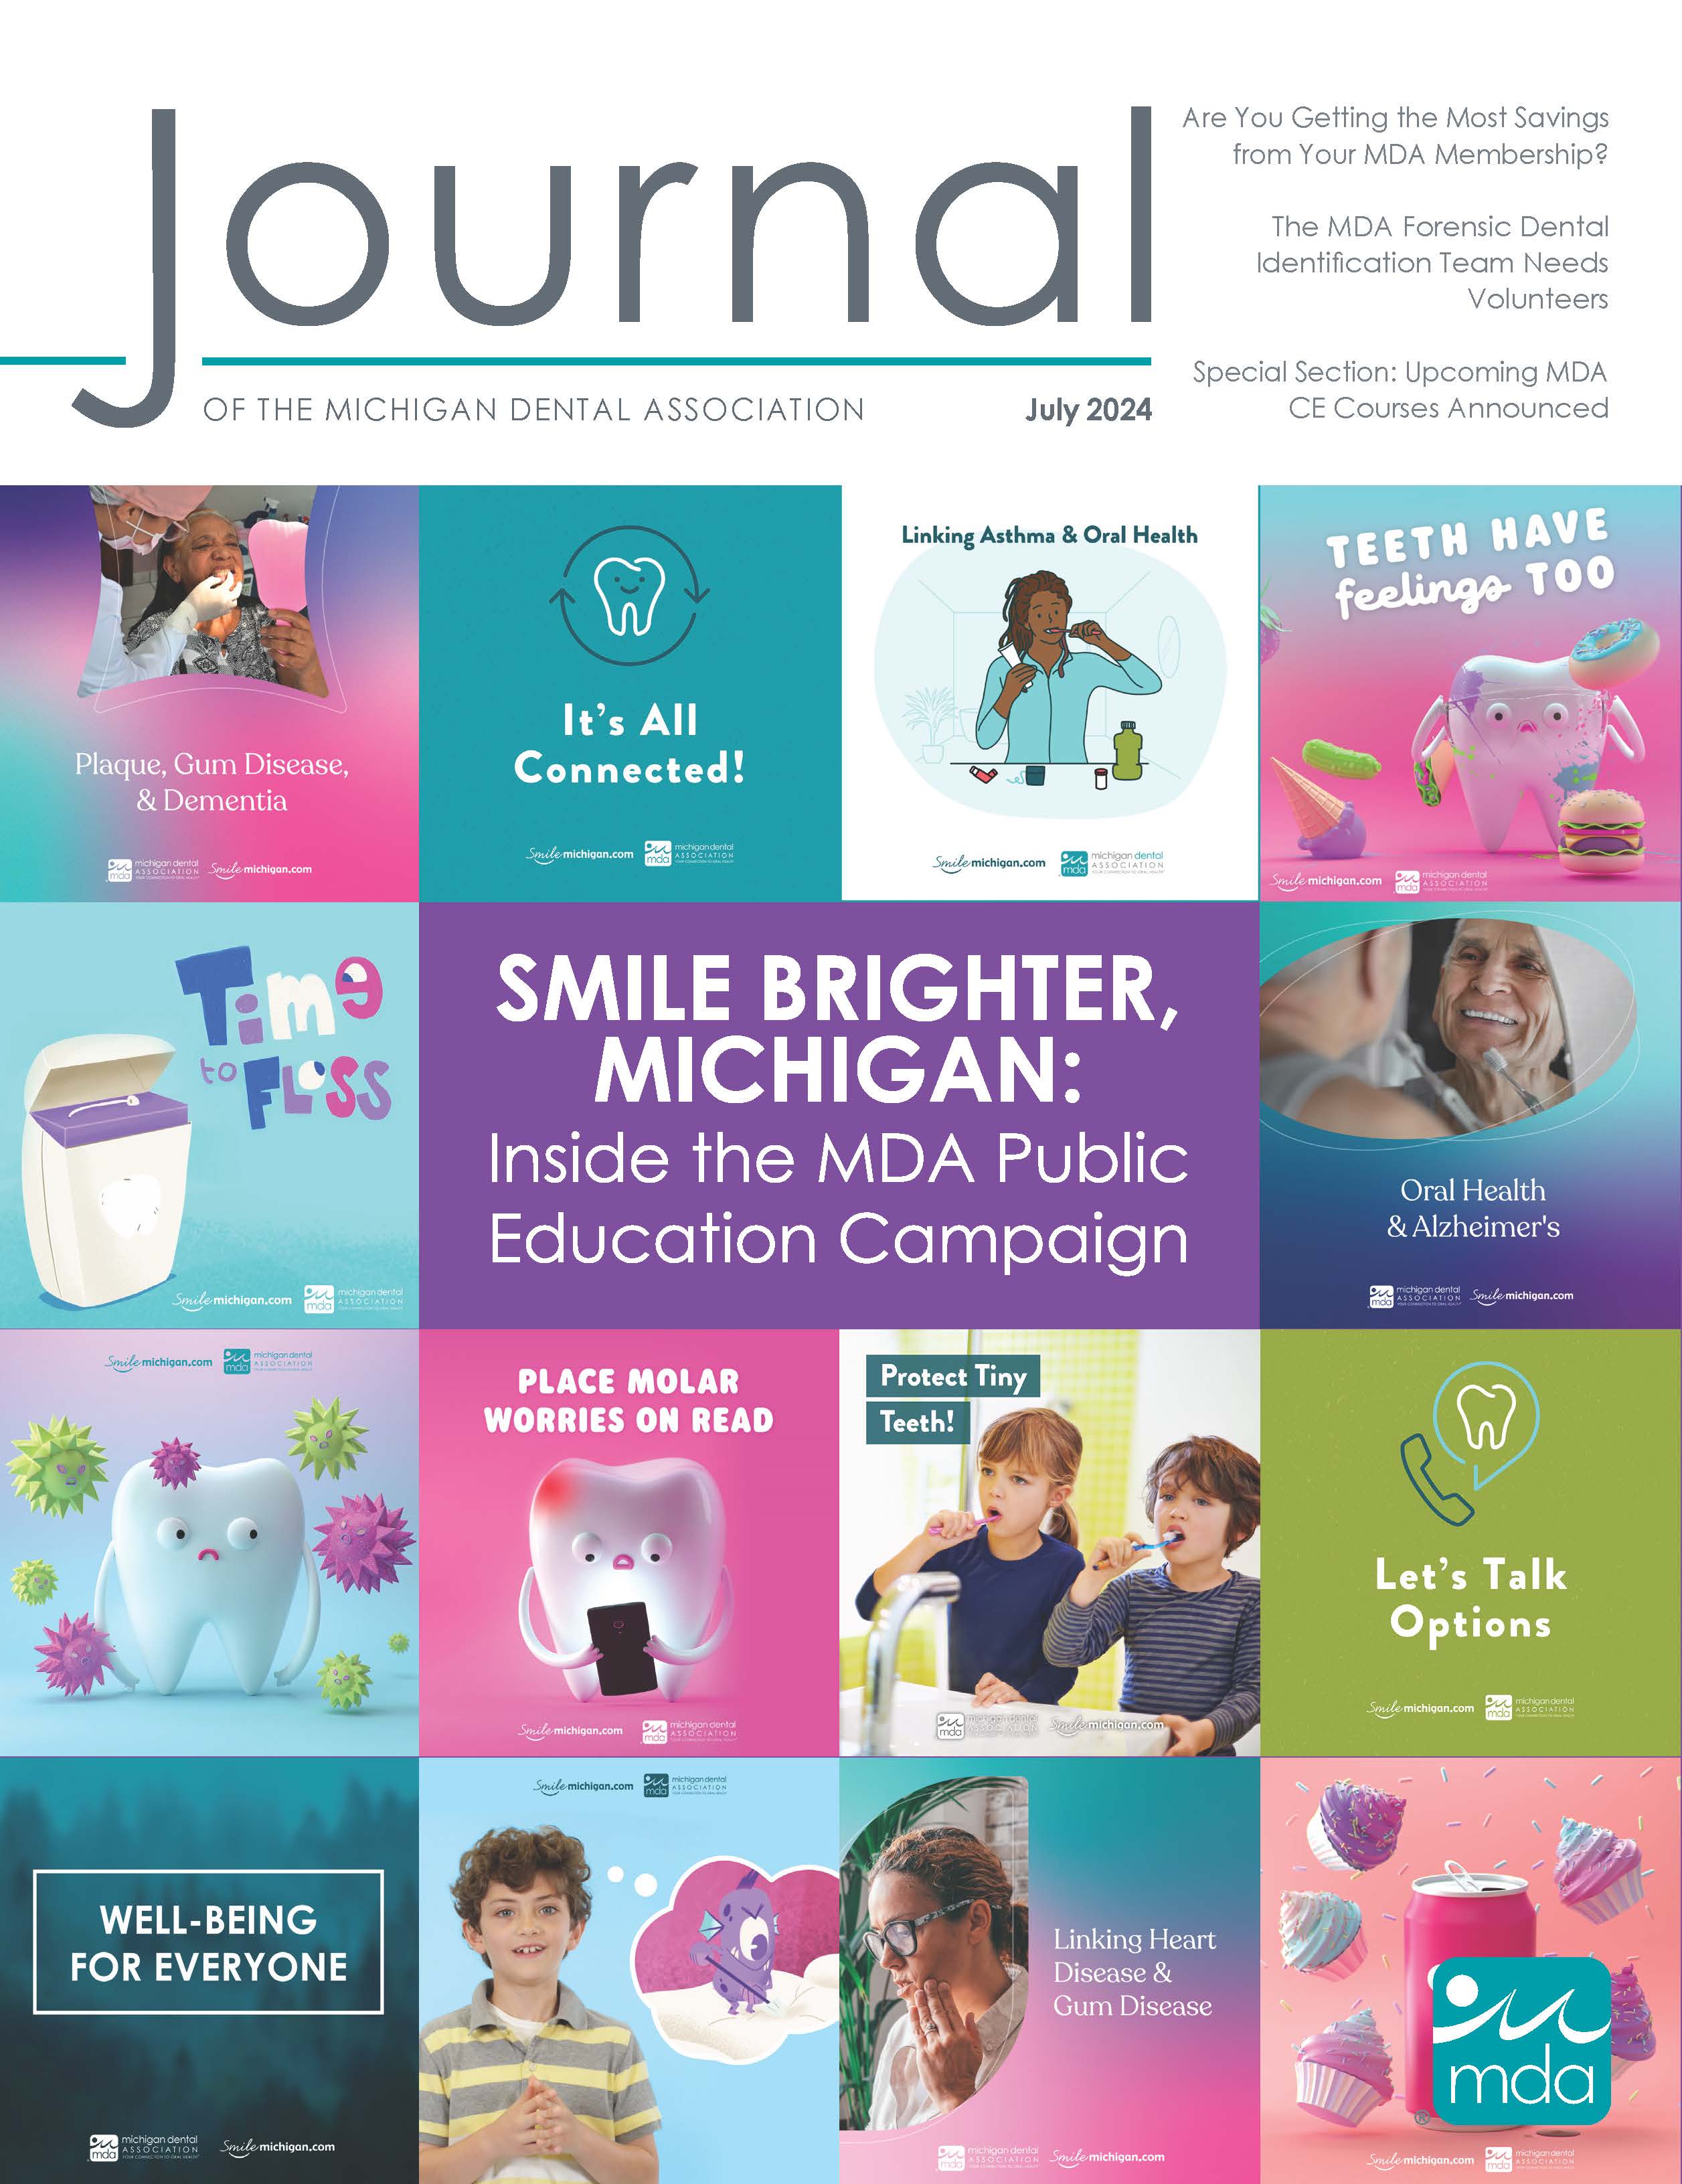 Cover of the Journal of the Michigan Dental Association with 14 boxes filled with colorful pictures and messages from the MDA public health campaign.